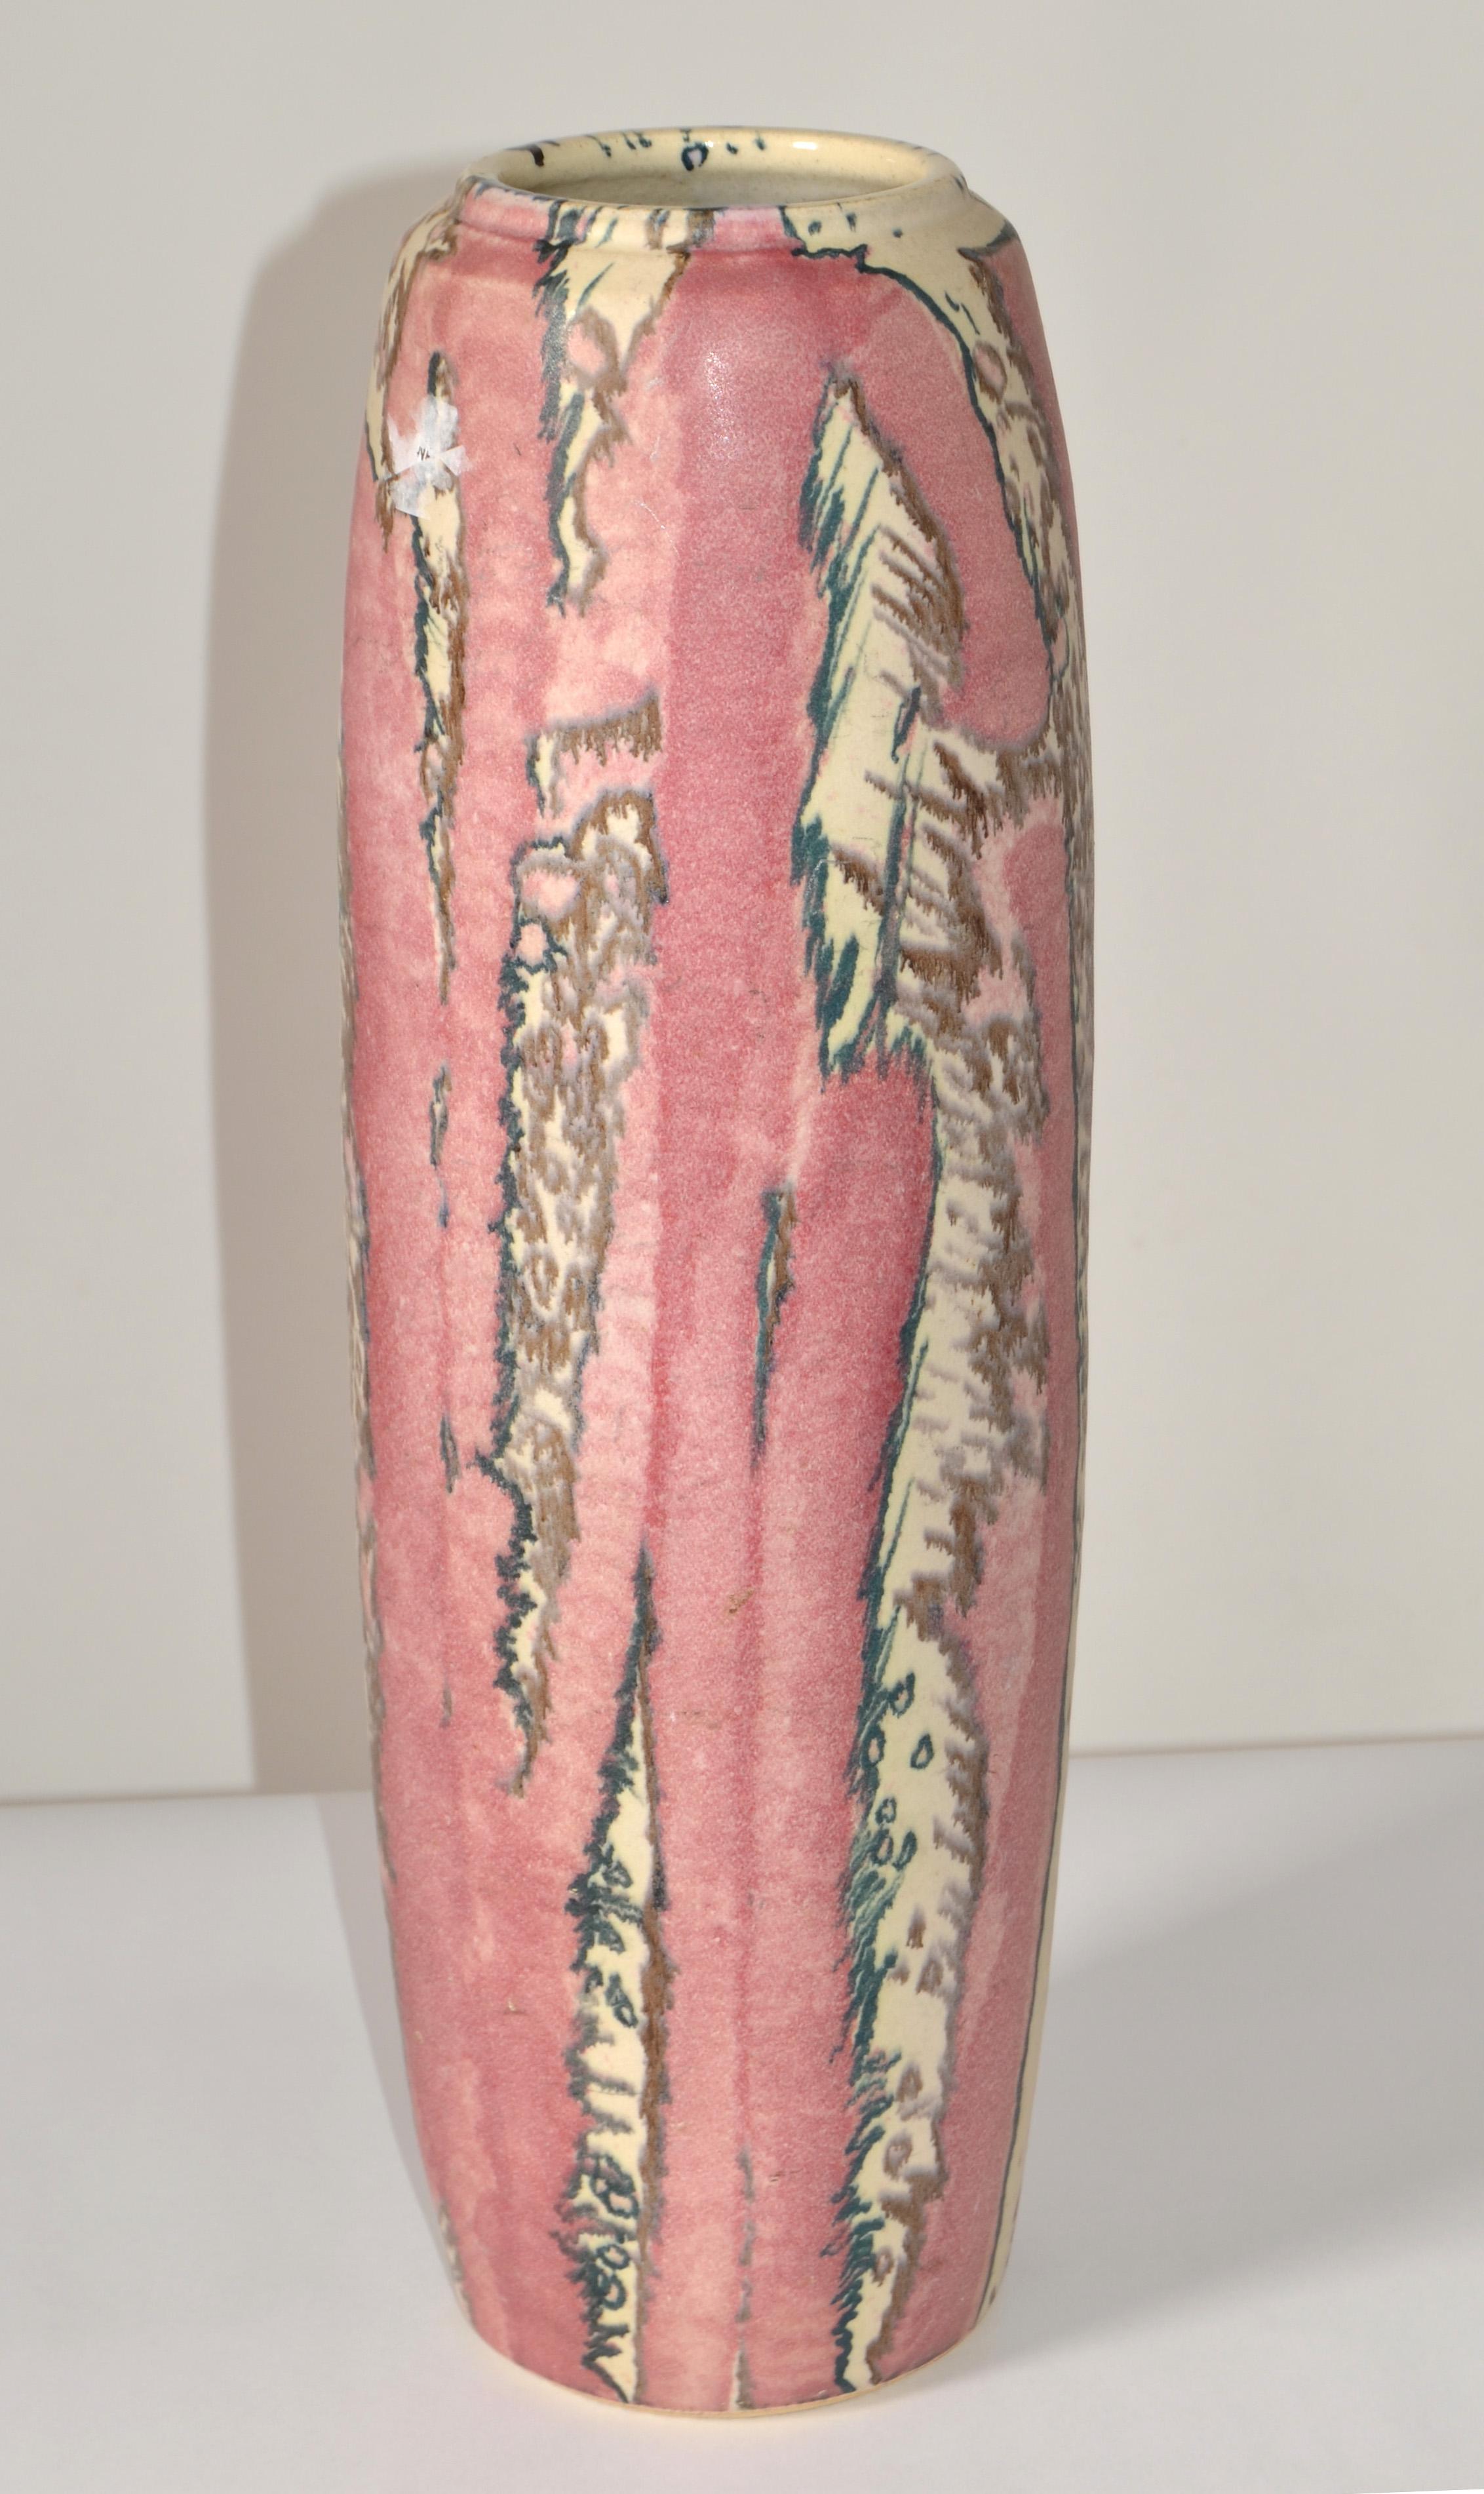 American Signed Tall Incised Glazed Ceramic Studio Piece Pink Vase Mid-Century Modern 70s For Sale